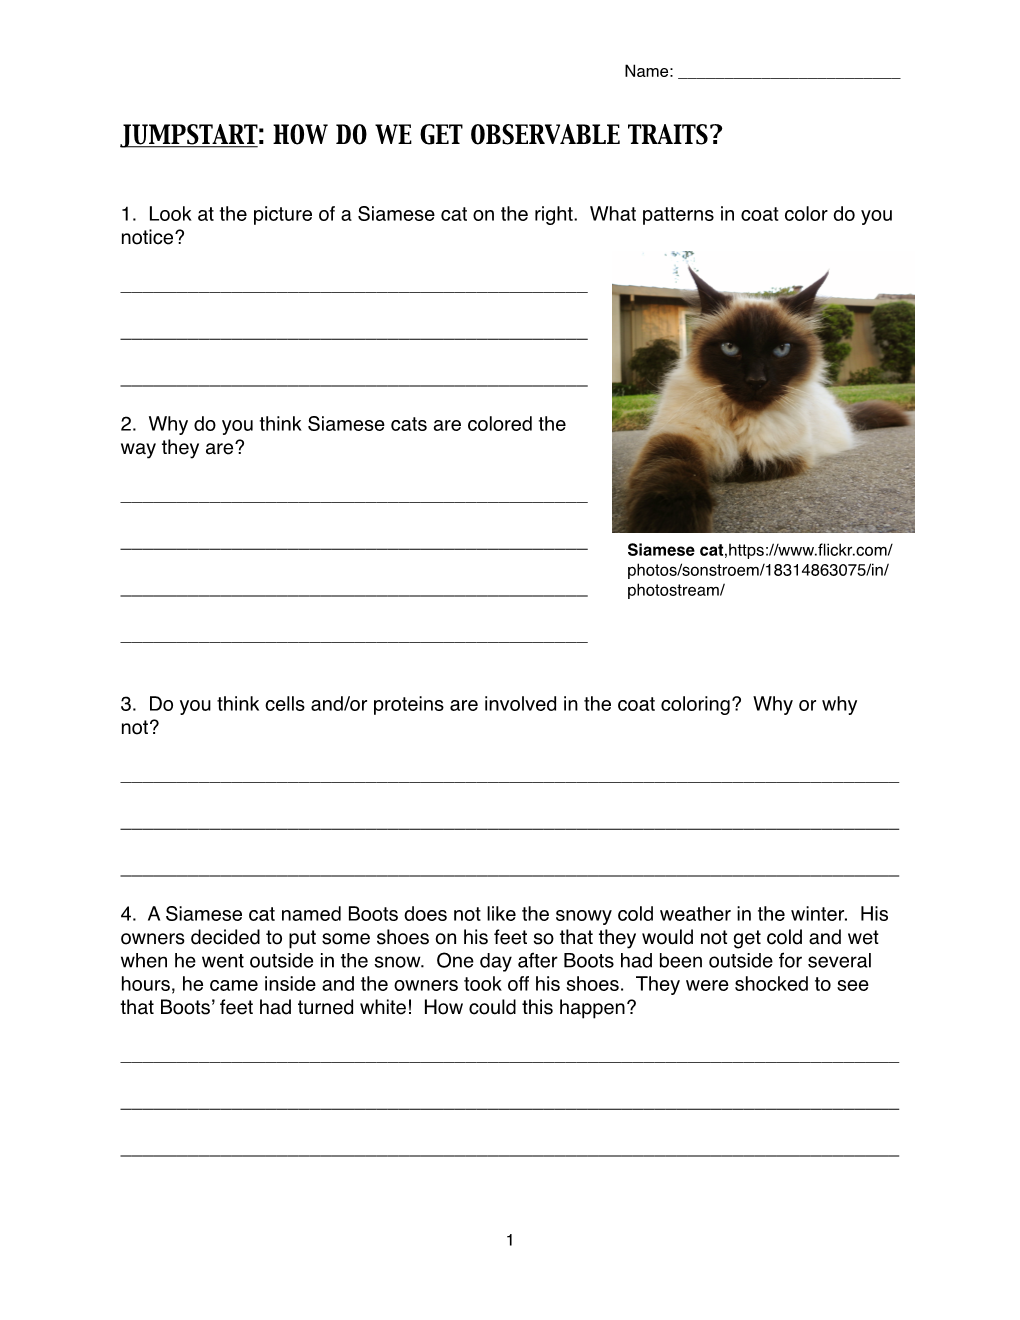 Siamese Cat Student Sheets.Pages